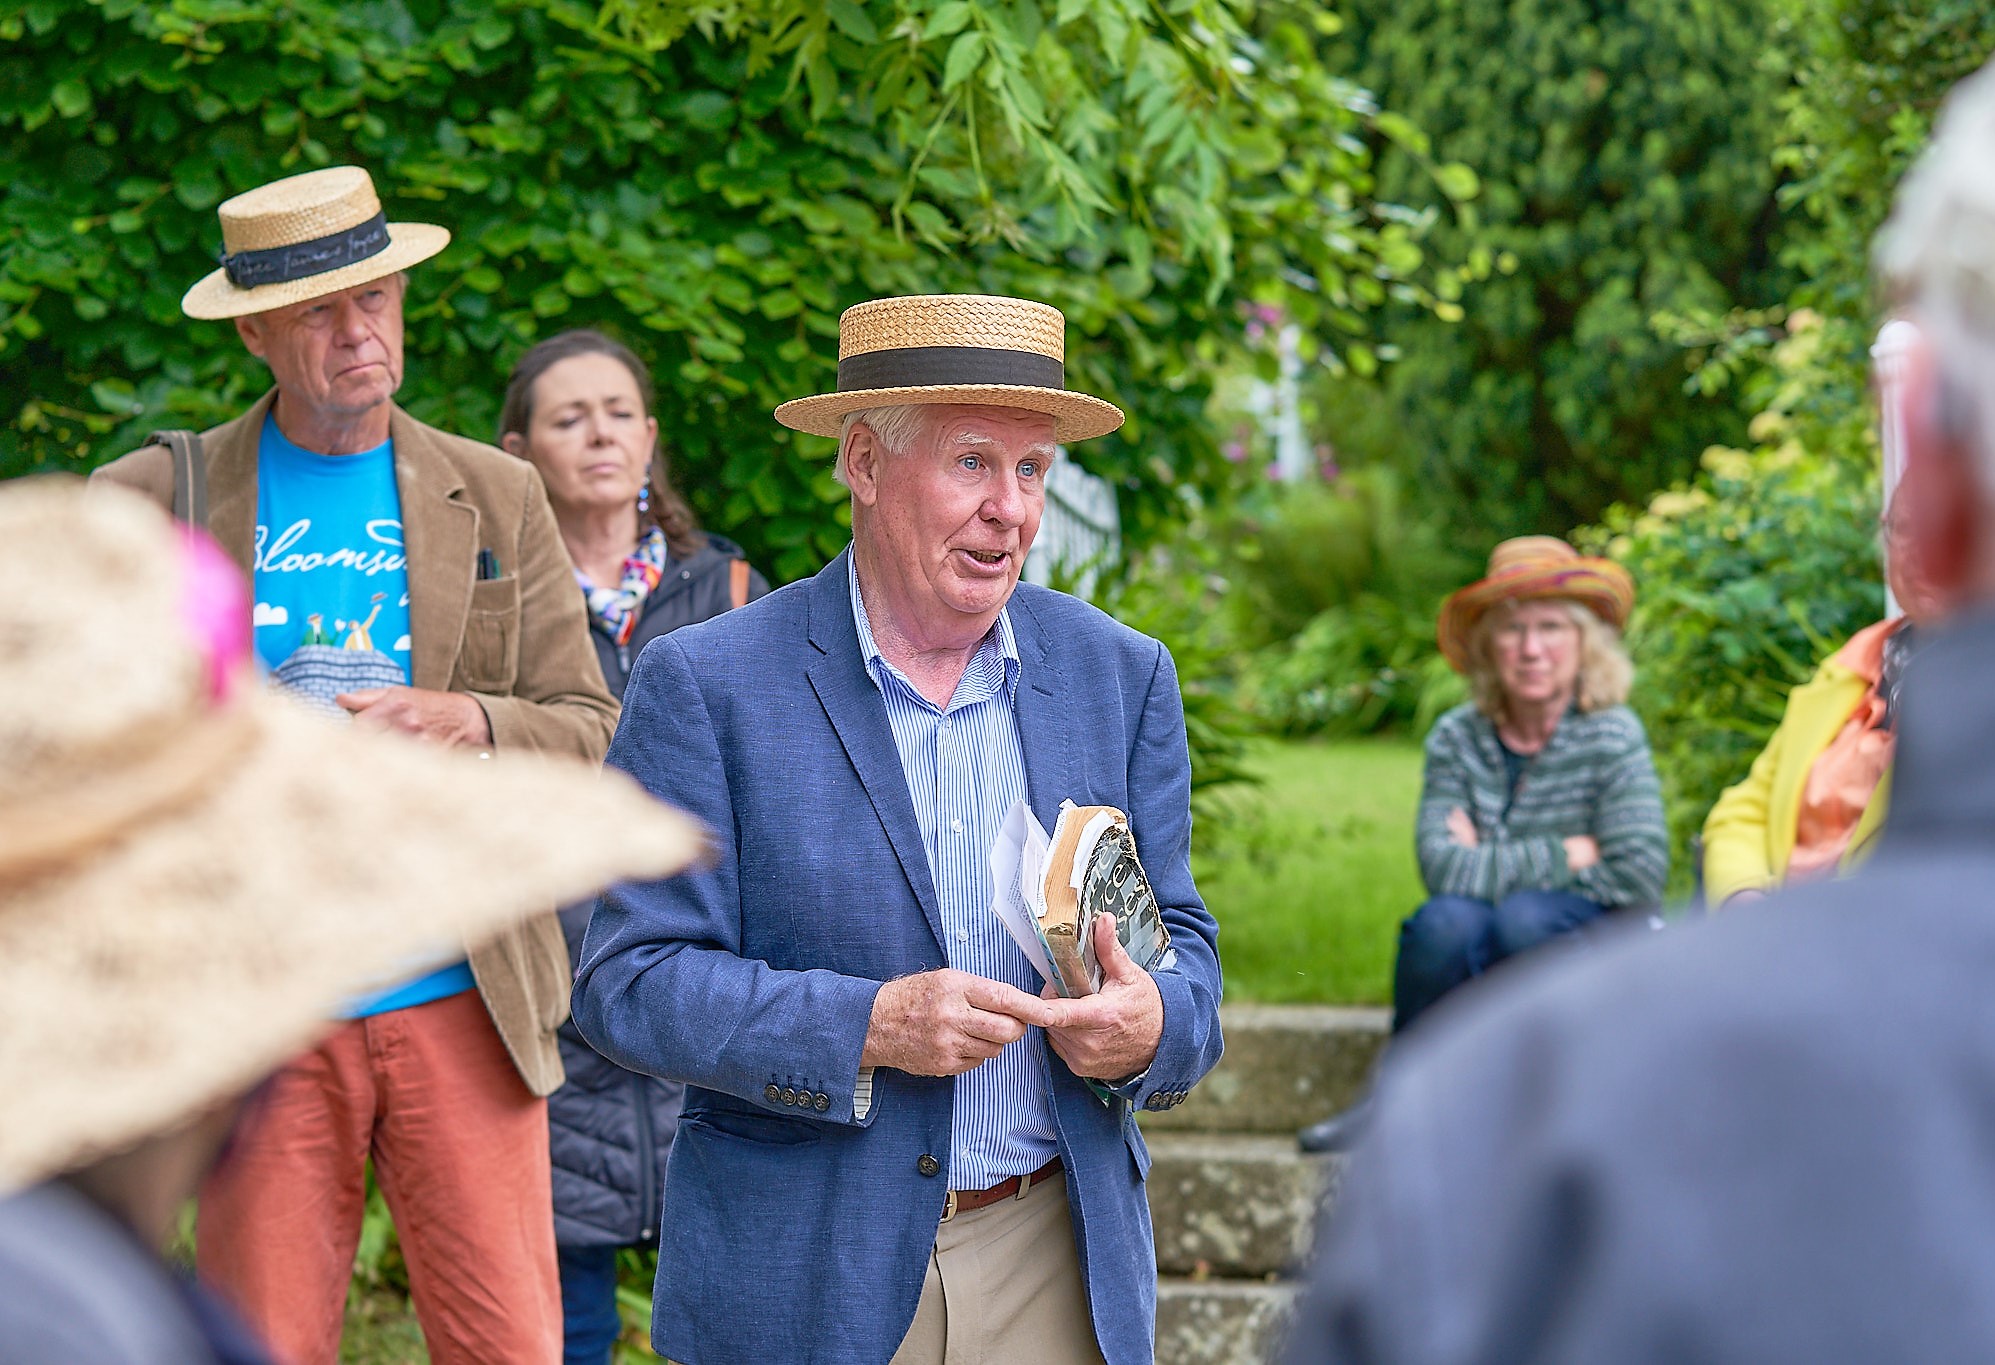 Local Joycean guide, Joe Dunne, leads a guided walk on Bloomsday, Sunday 16th June 2024 from Dalkey Castle. Discover James Joyce's Dalkey connections including the school where he taught for a time